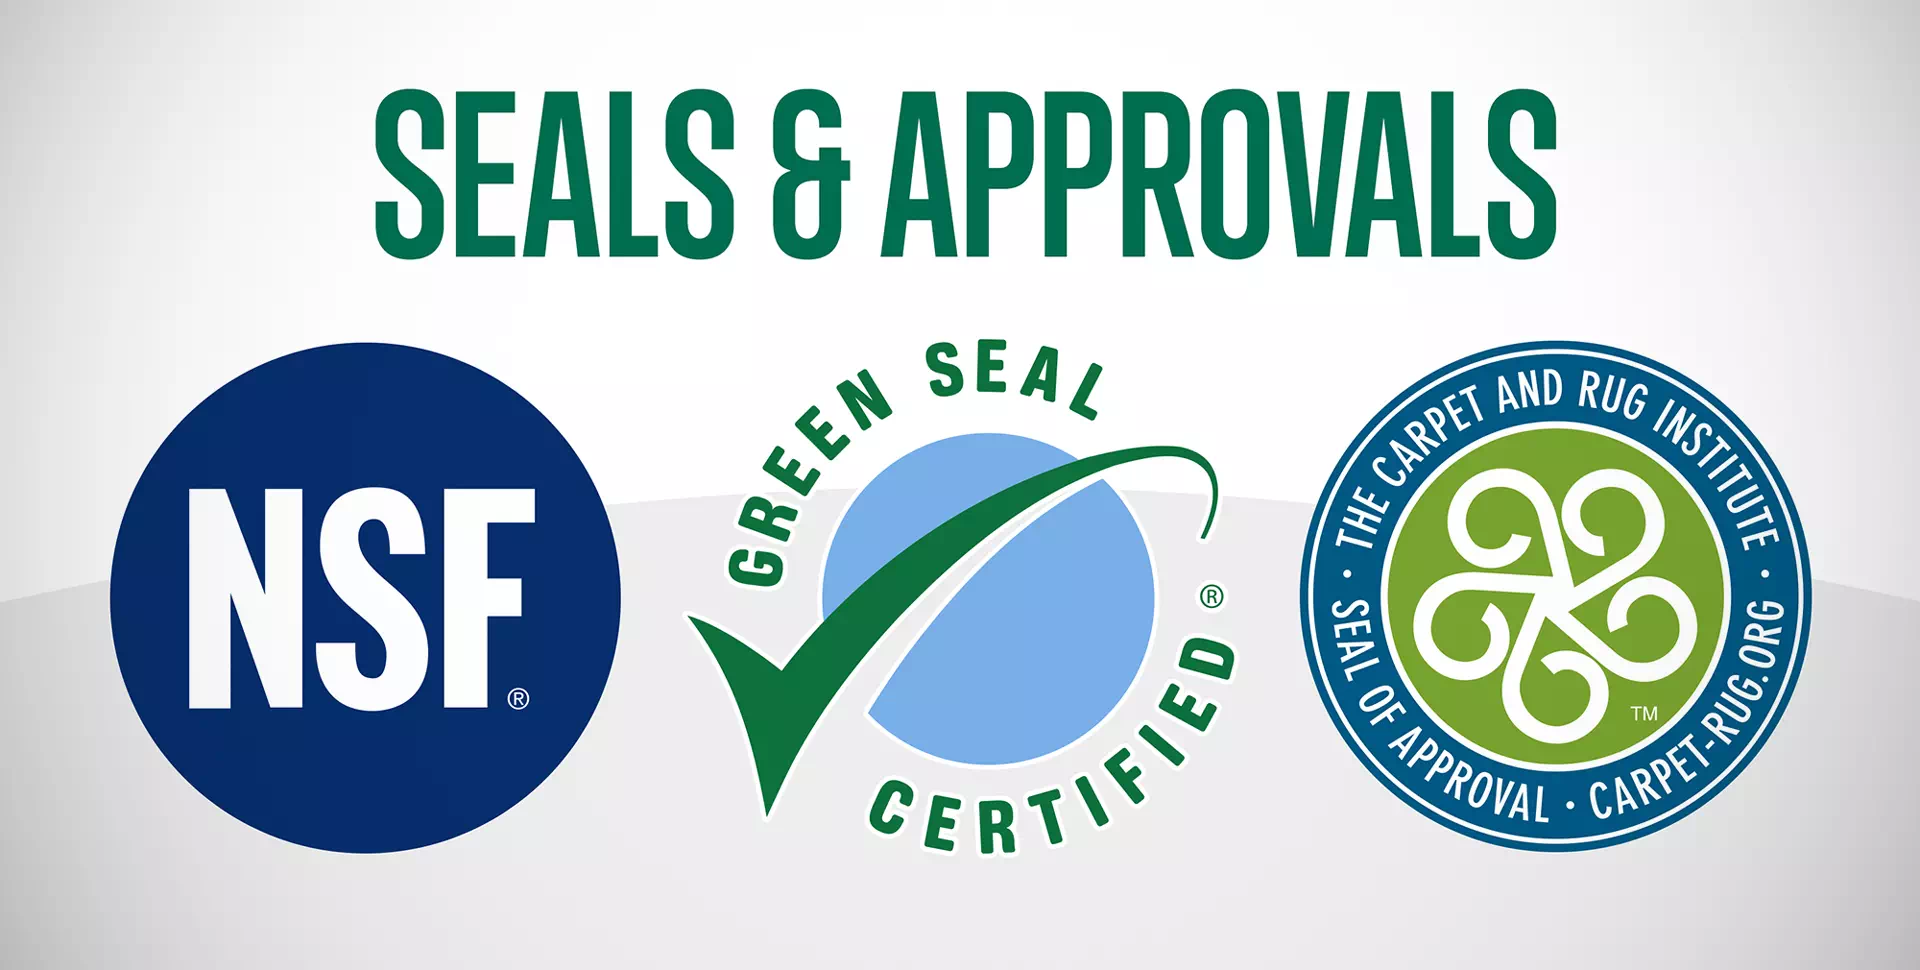 Seals and Approvals